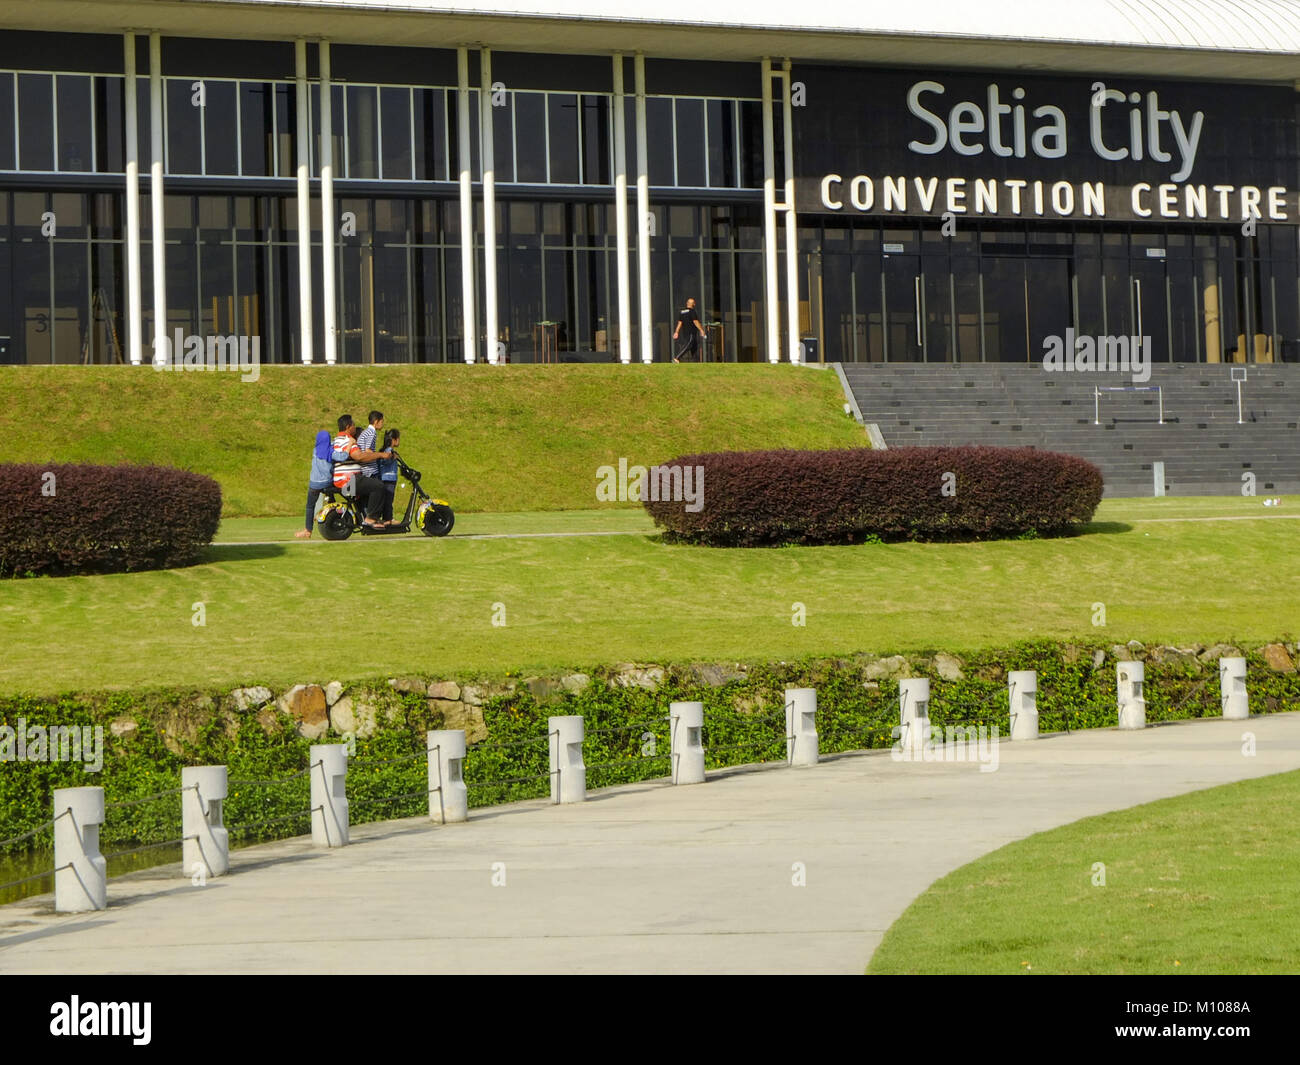 January 22, 2018 - Kuala Lumpur, Kuala Lumpur, Malaysia - A father take his children for a rides on a mini scooter at Setia City convention centre...Kuala Lumpur or commonly known as KL is the national capital for Malaysia and is the fastest growing metropolitan regions in South-East Asia. The urban city is also well known to the world for tourism and shopping. Kuala Lumpur has a great public transportation for people travel around the city. (Credit Image: © Faris Hadziq/SOPA via ZUMA Wire) Stock Photo